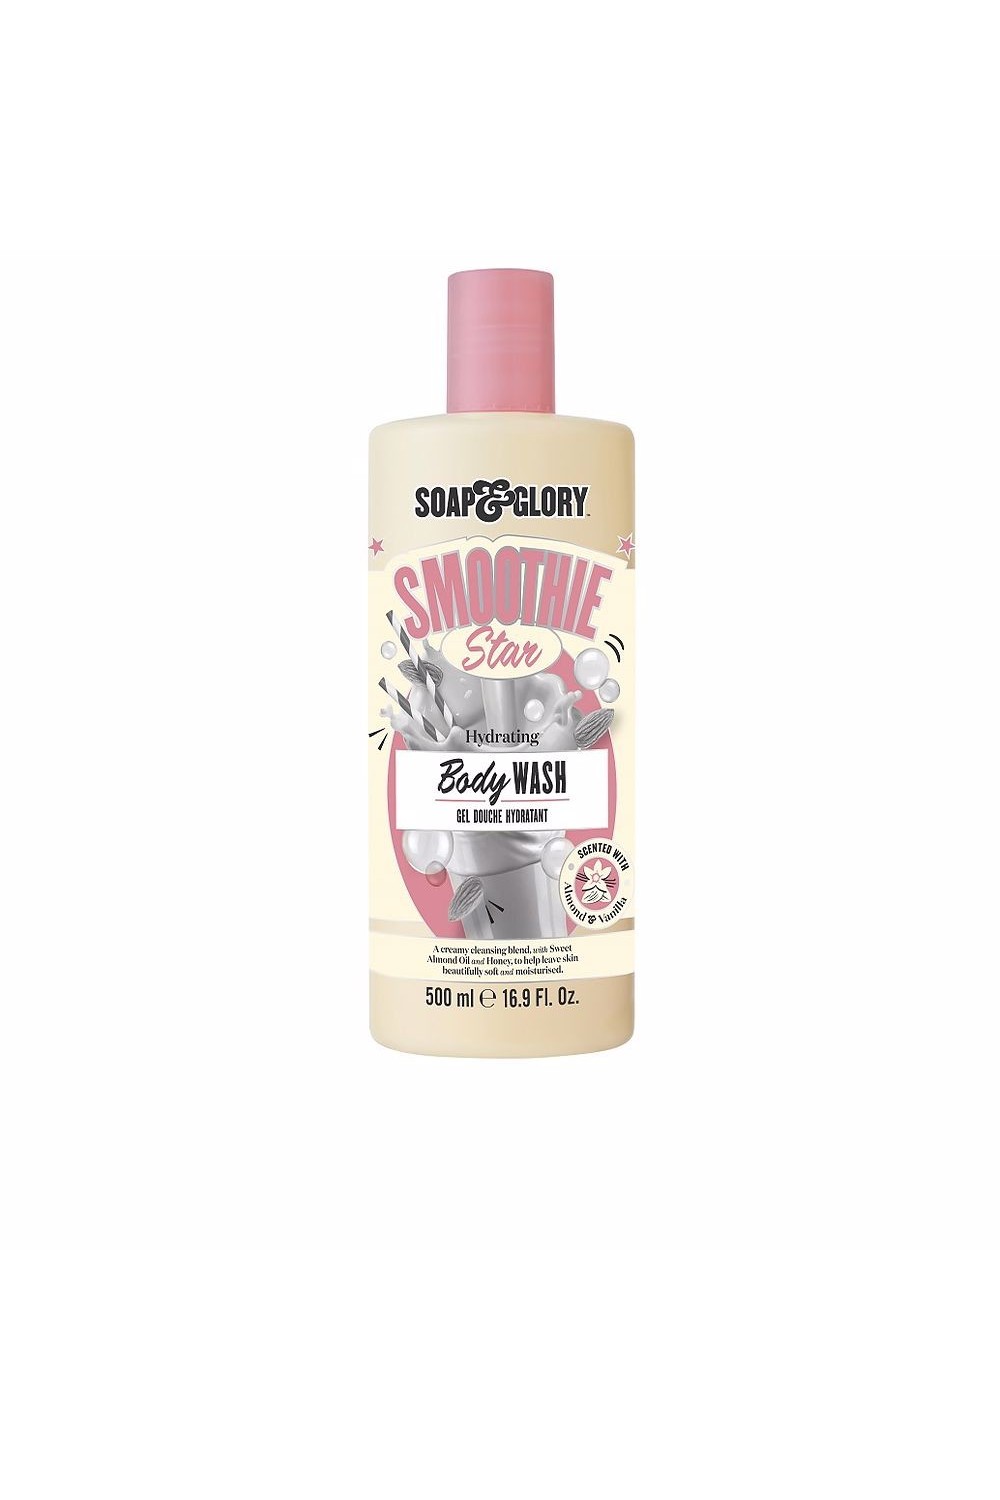 SOAP & GLORY - Soap and Glory Smoothie Star Body Wash 500ml